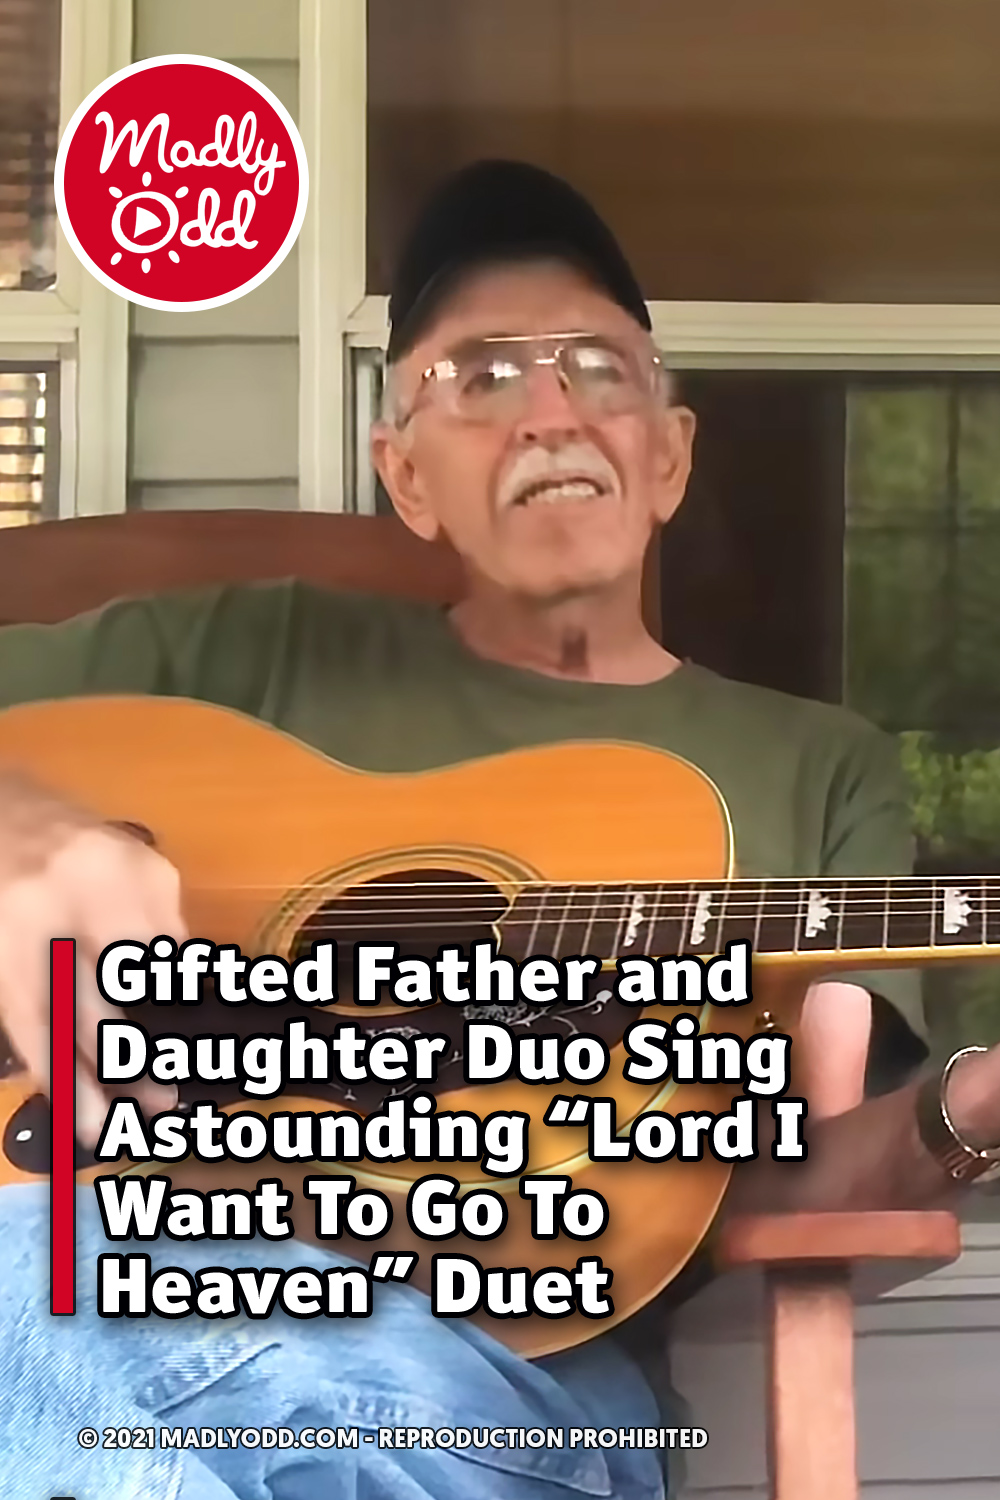 Gifted Father and Daughter Duo Sing Astounding “Lord I Want To Go To Heaven” Duet